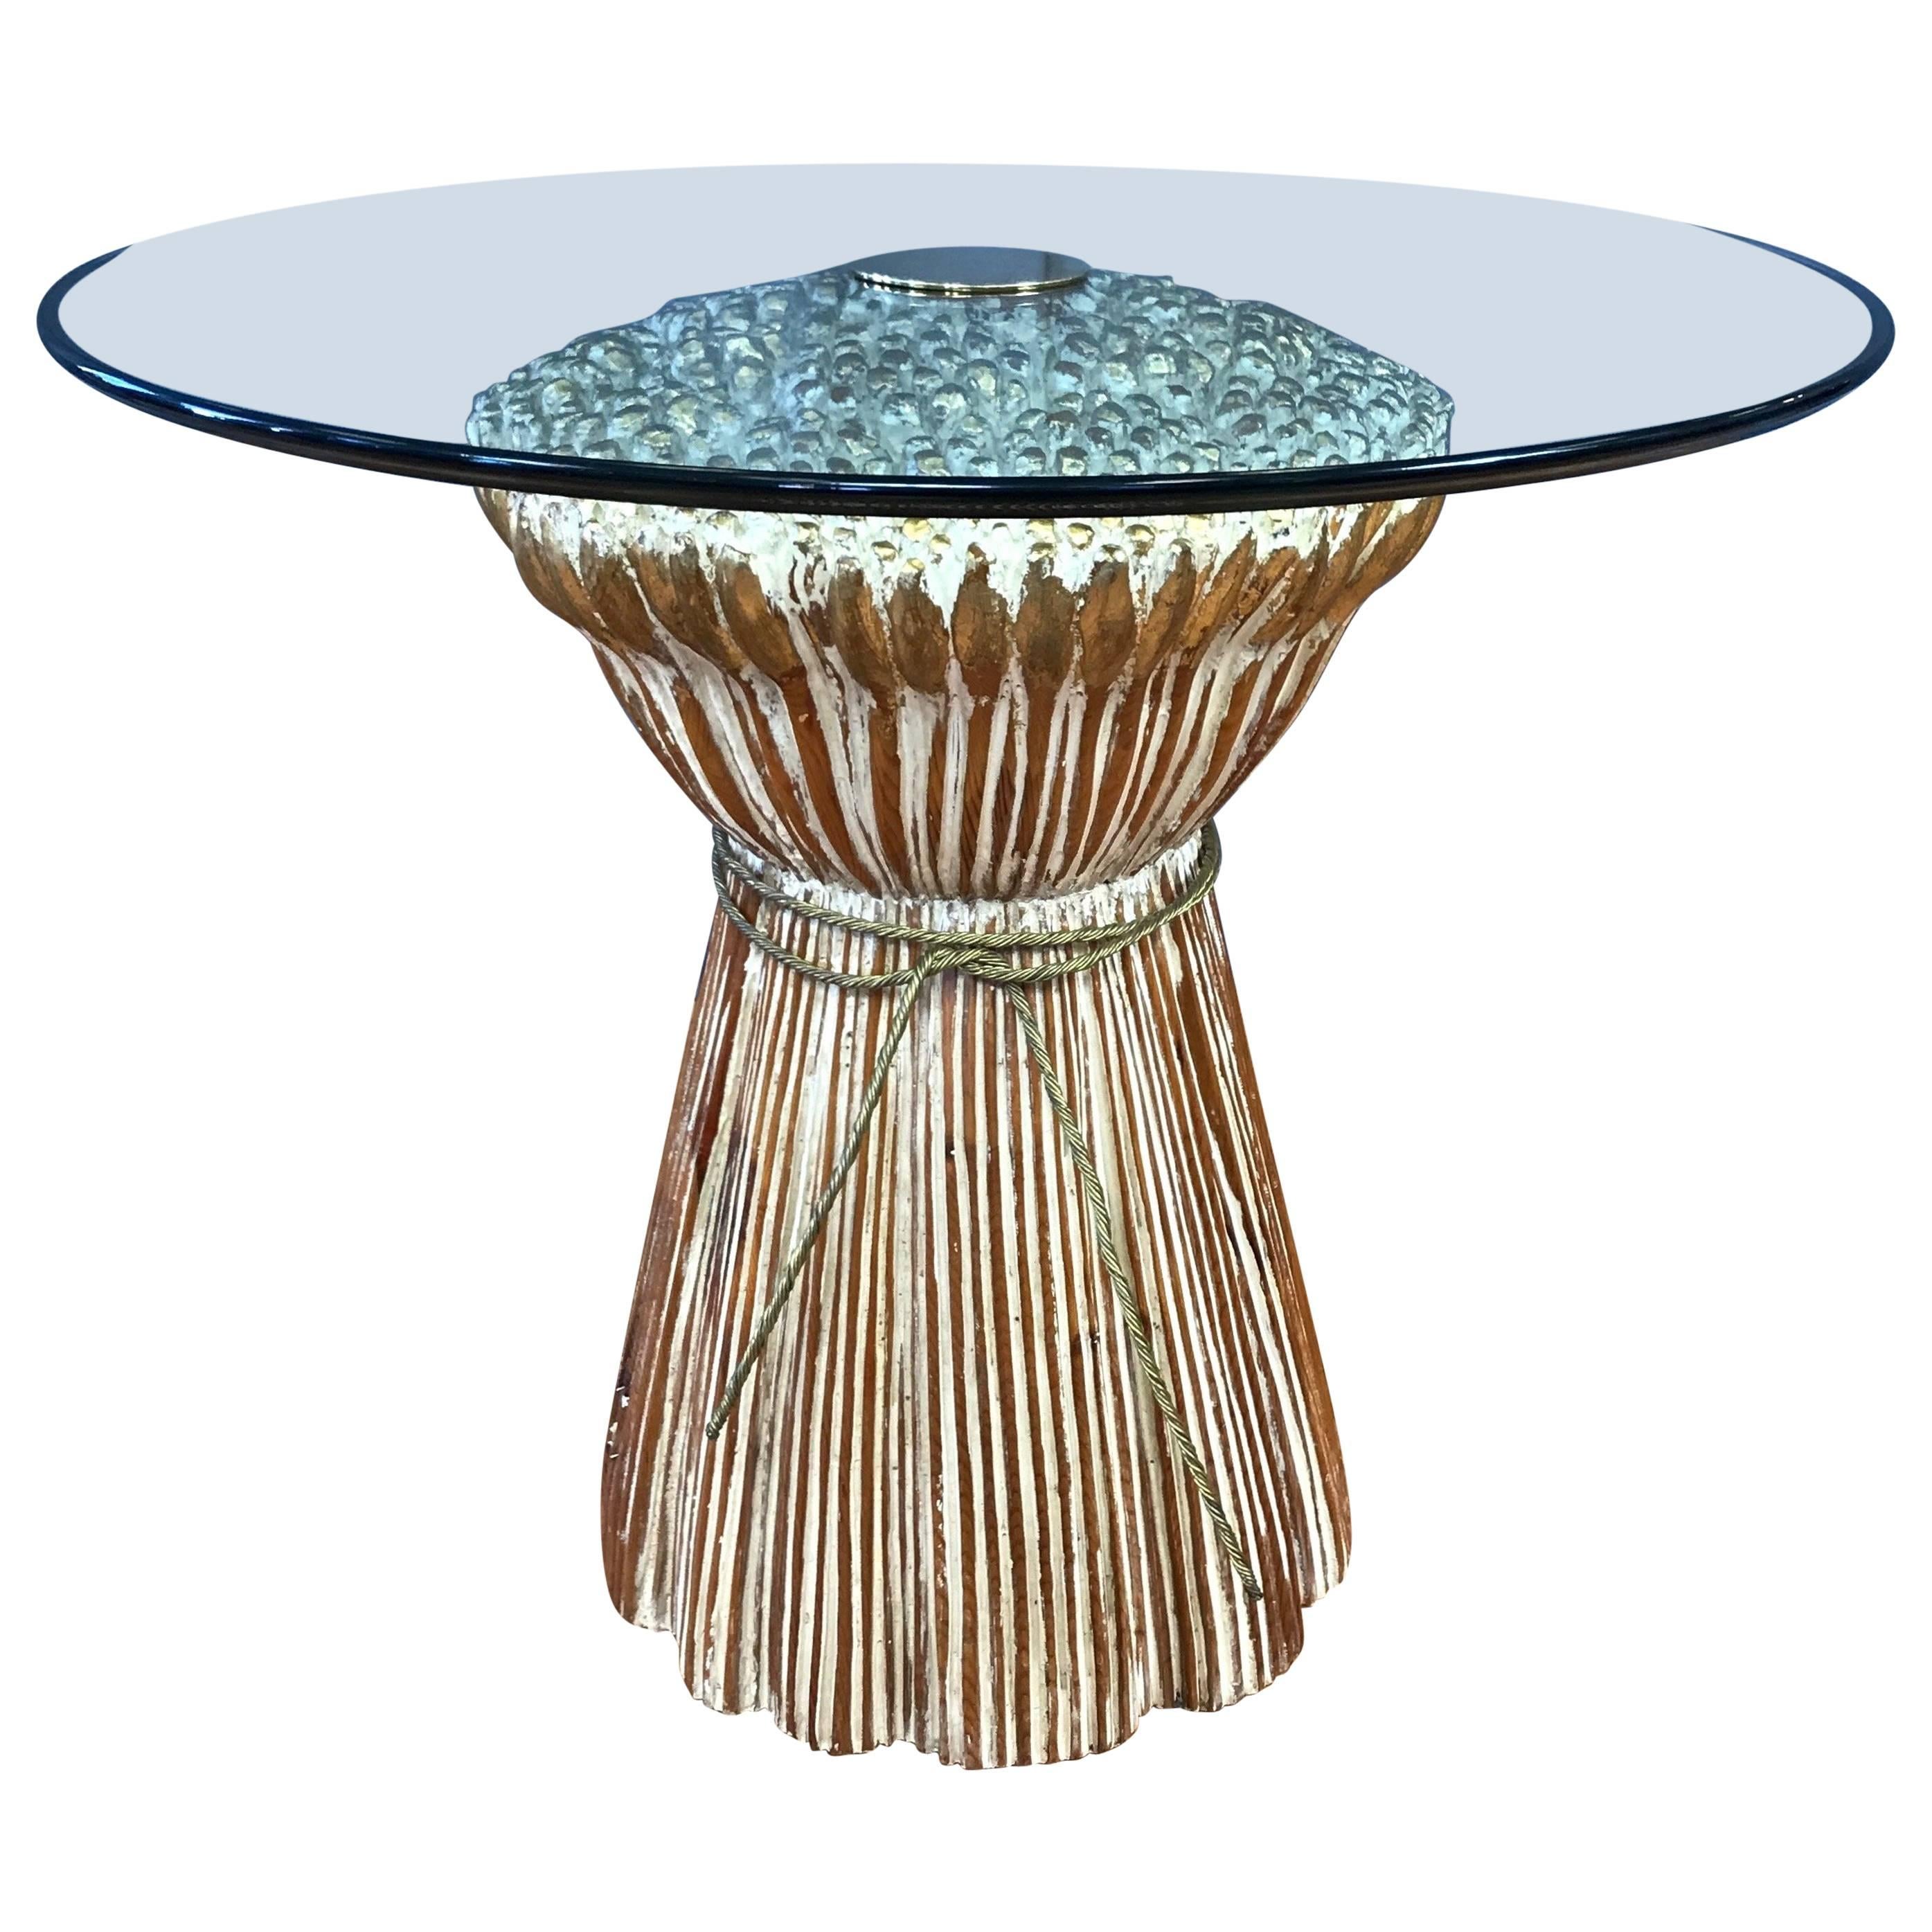 Sculptural Carved Wood Wheat Sheaf Table with Glass Top